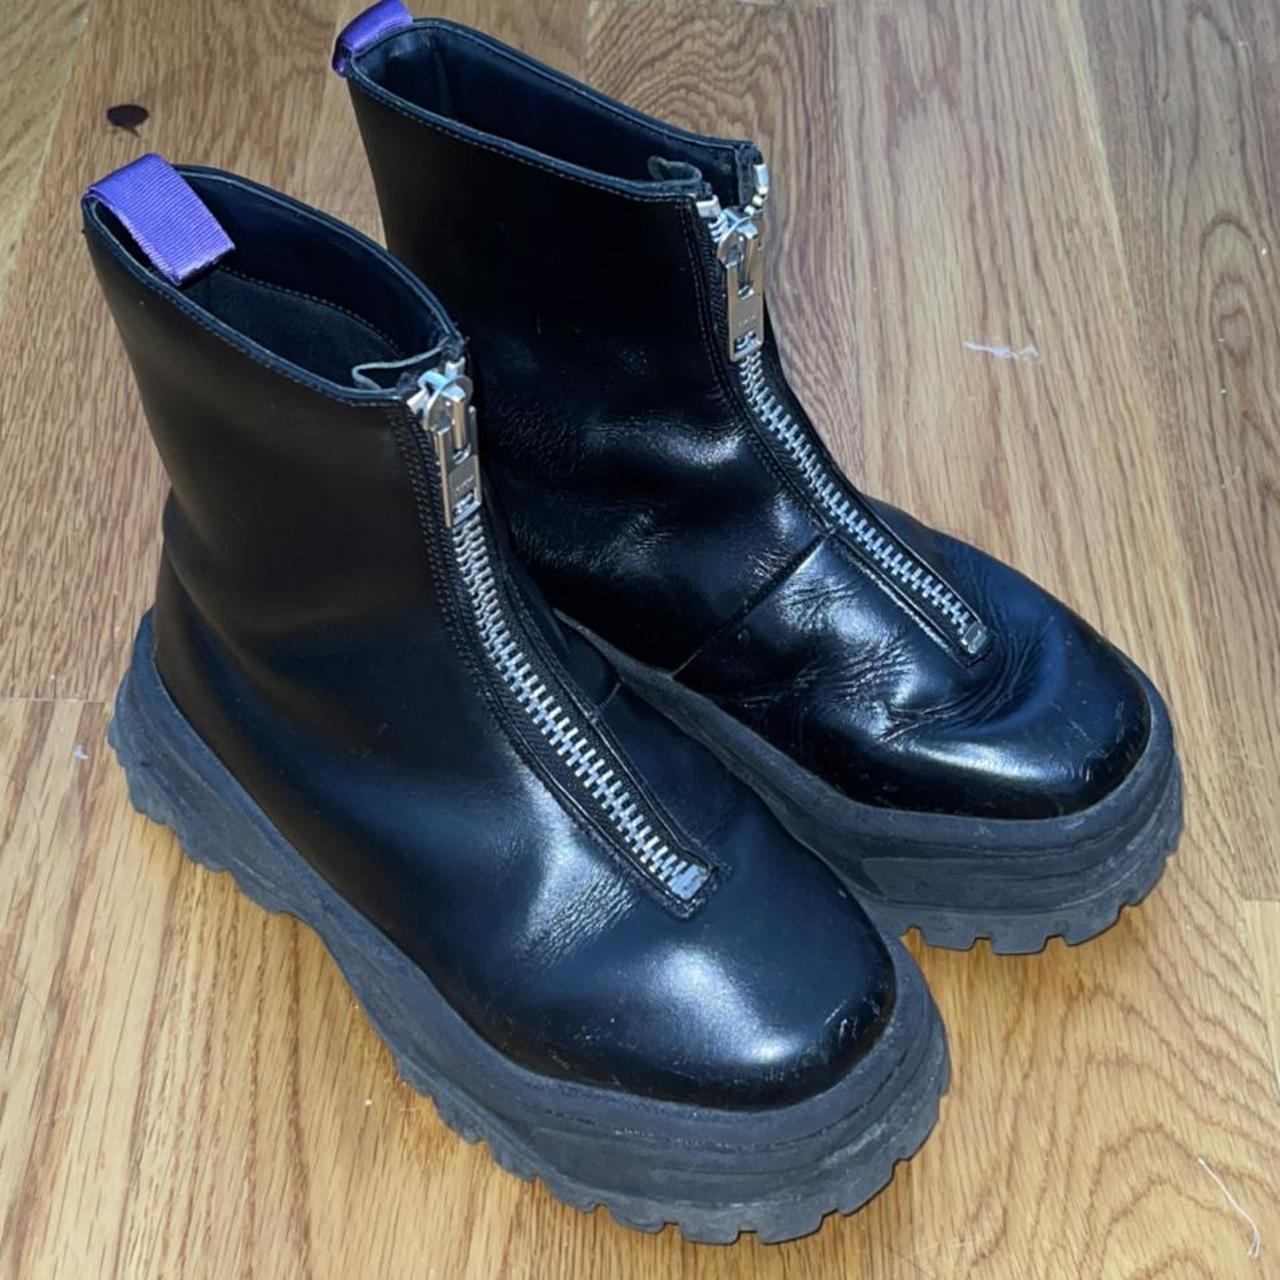 Eytys Raven Boots, black, size 36 in good condition, - Depop